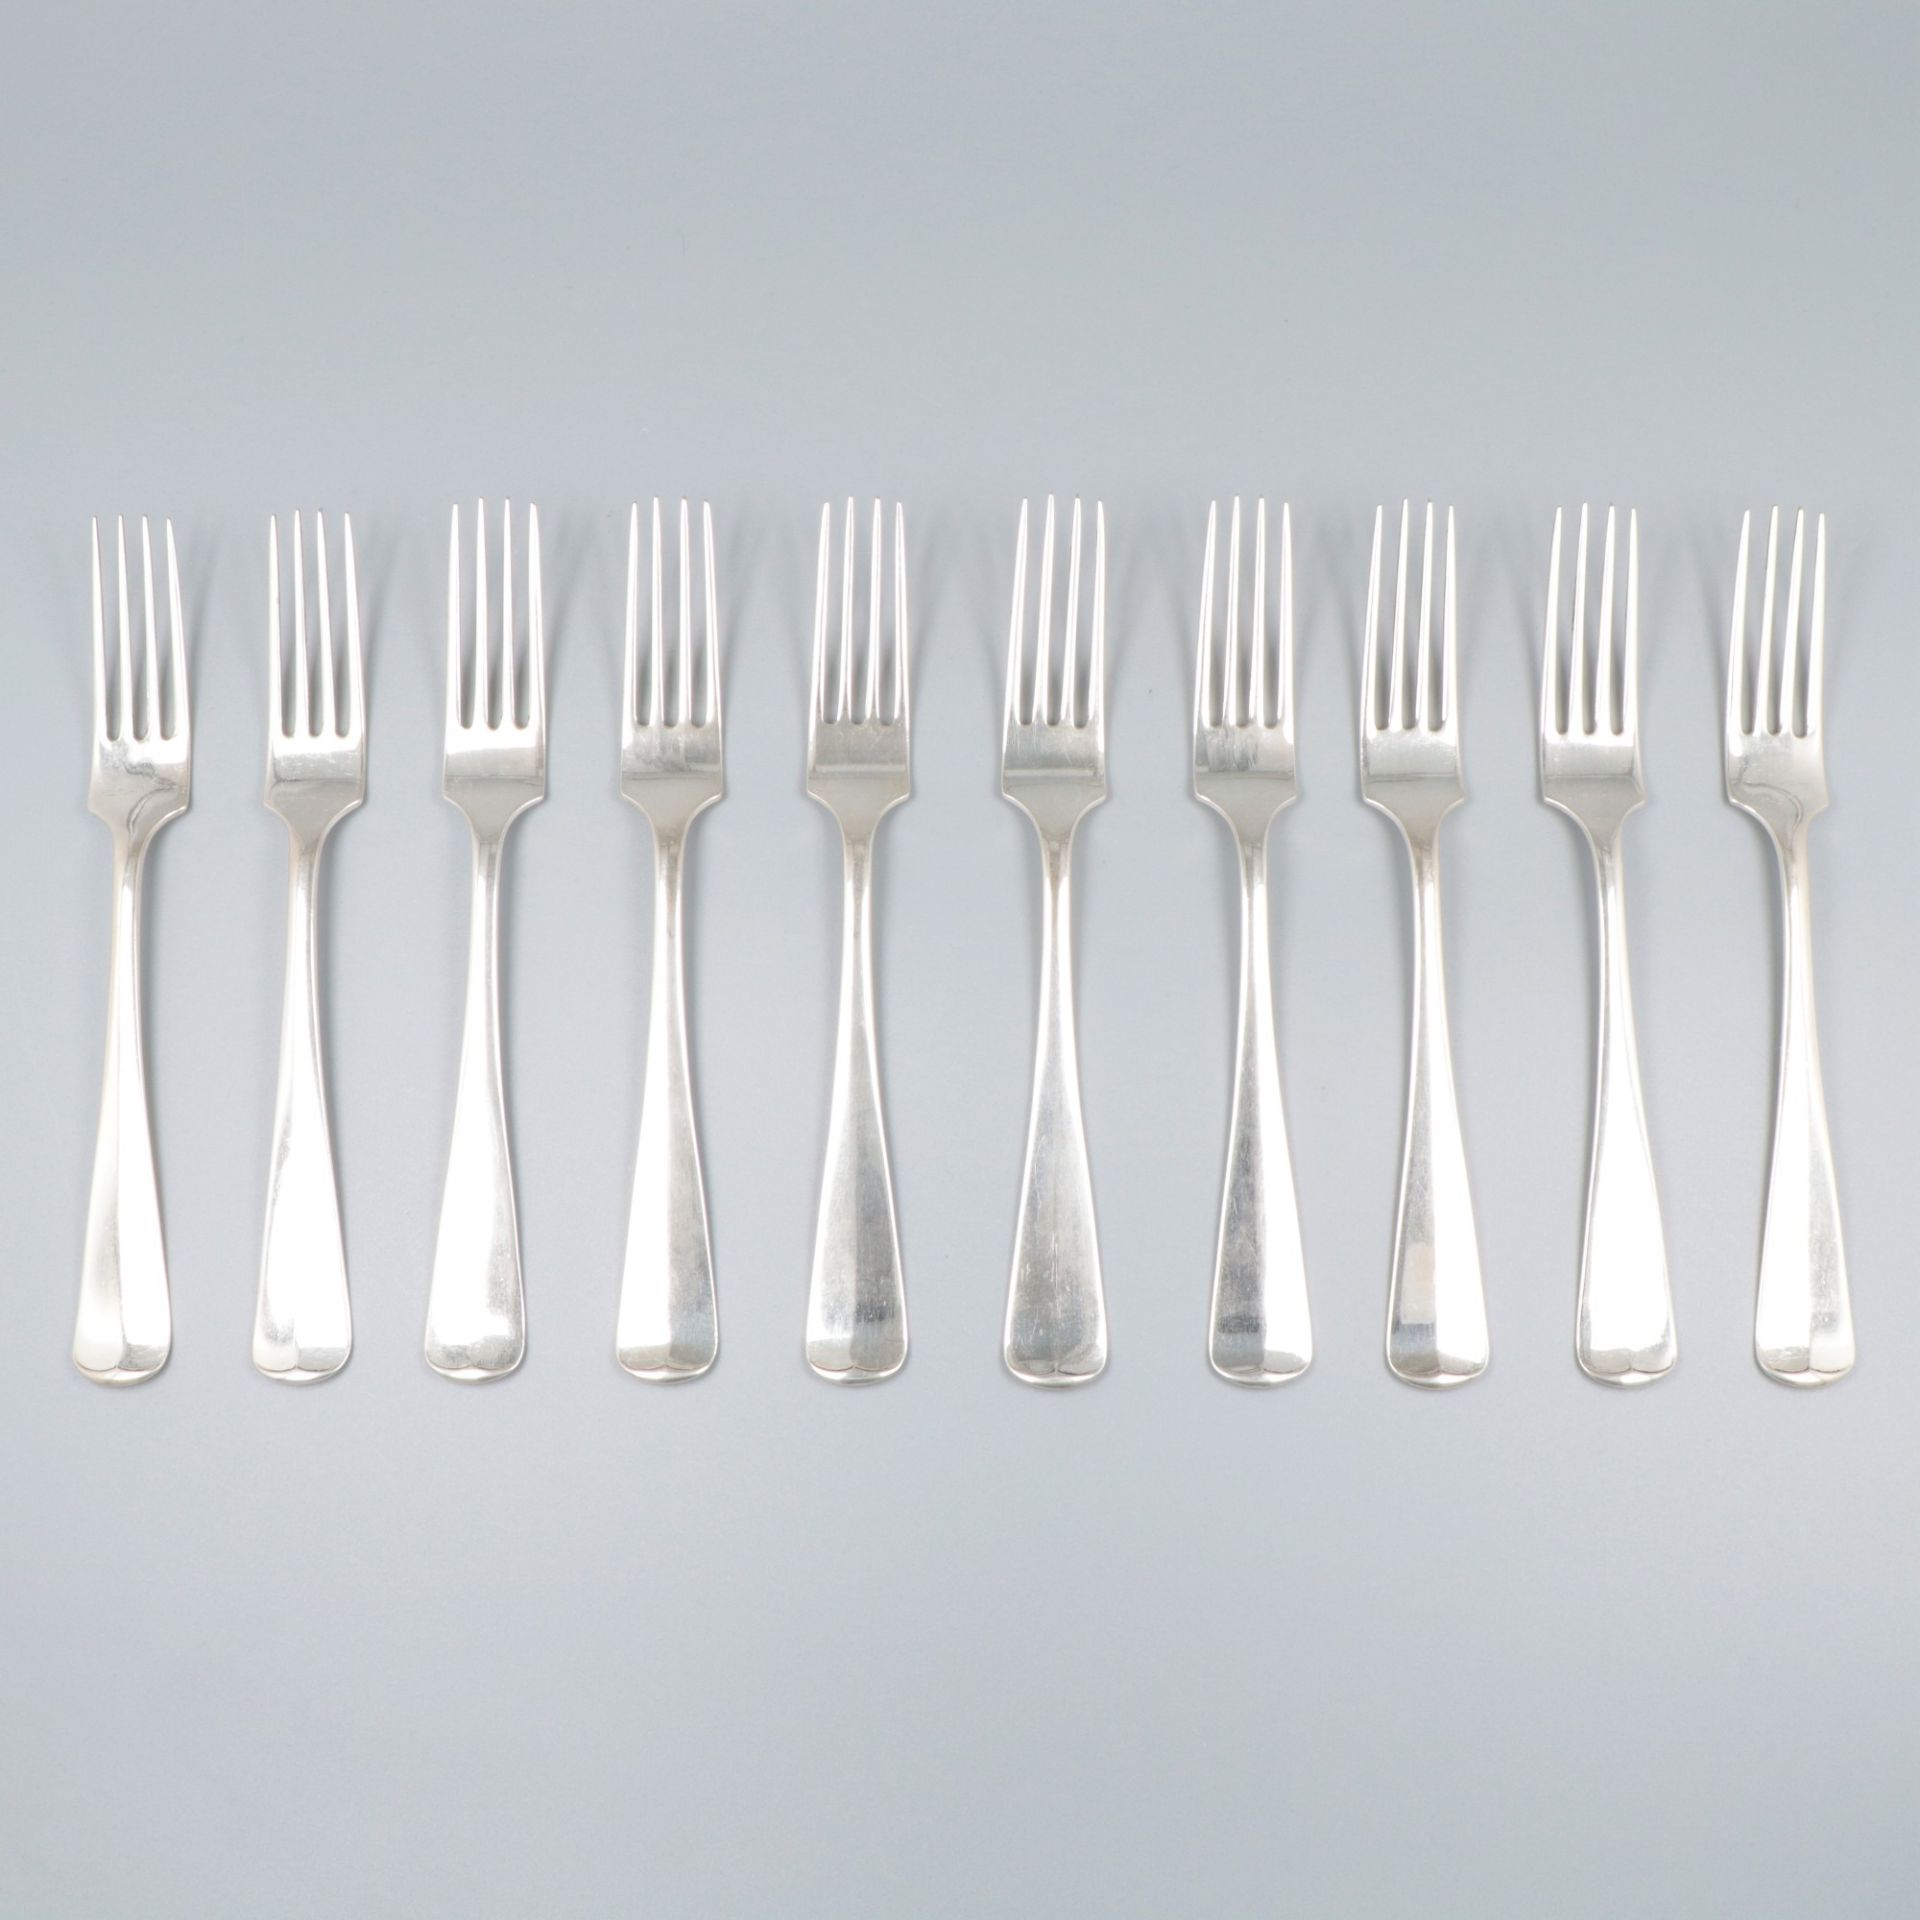 10-piece set of forks "Haags Lofje" silver.